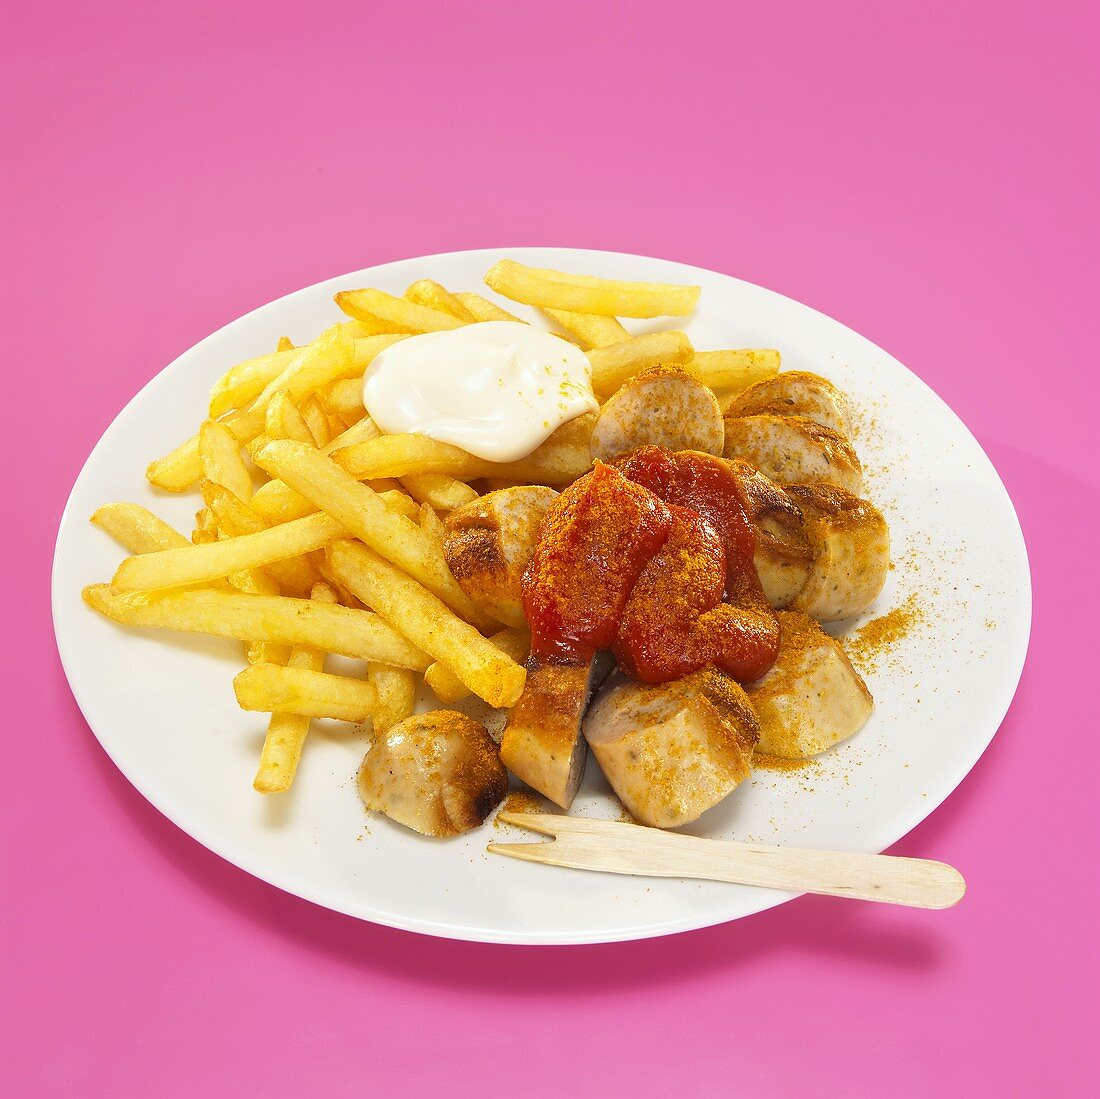 Currywurst and French fries with sauce in plate, close-up